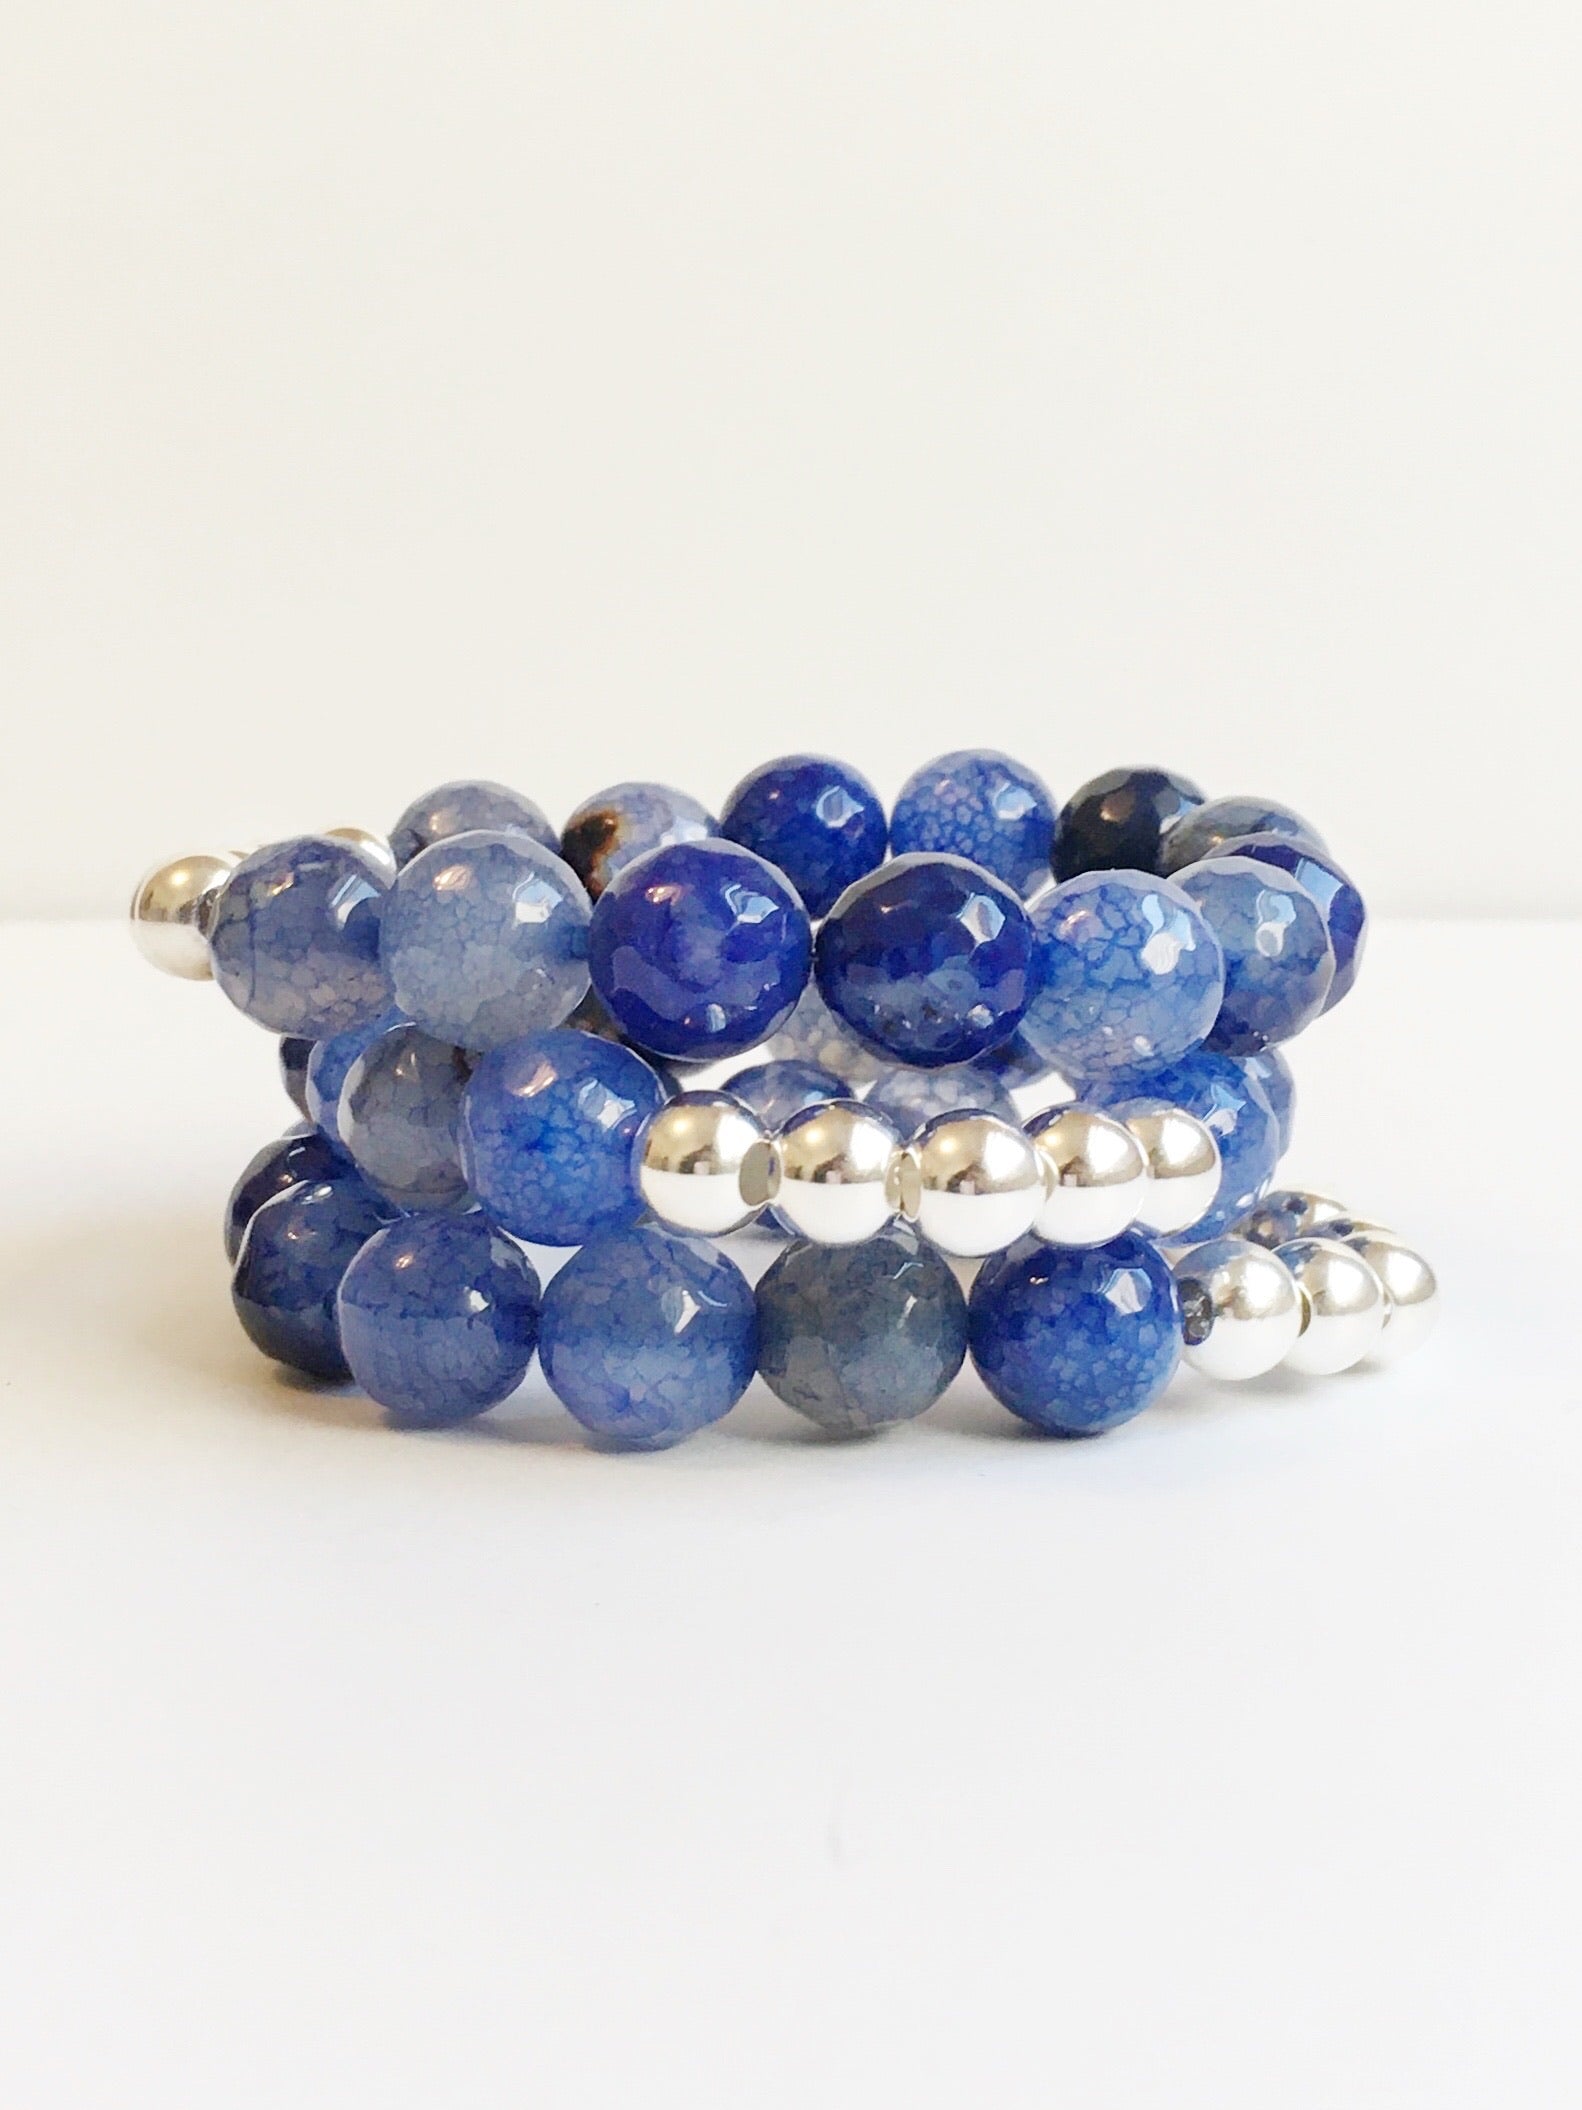 Three Blue Striped Agate and Silver Beaded Stretch Bracelets stacked.